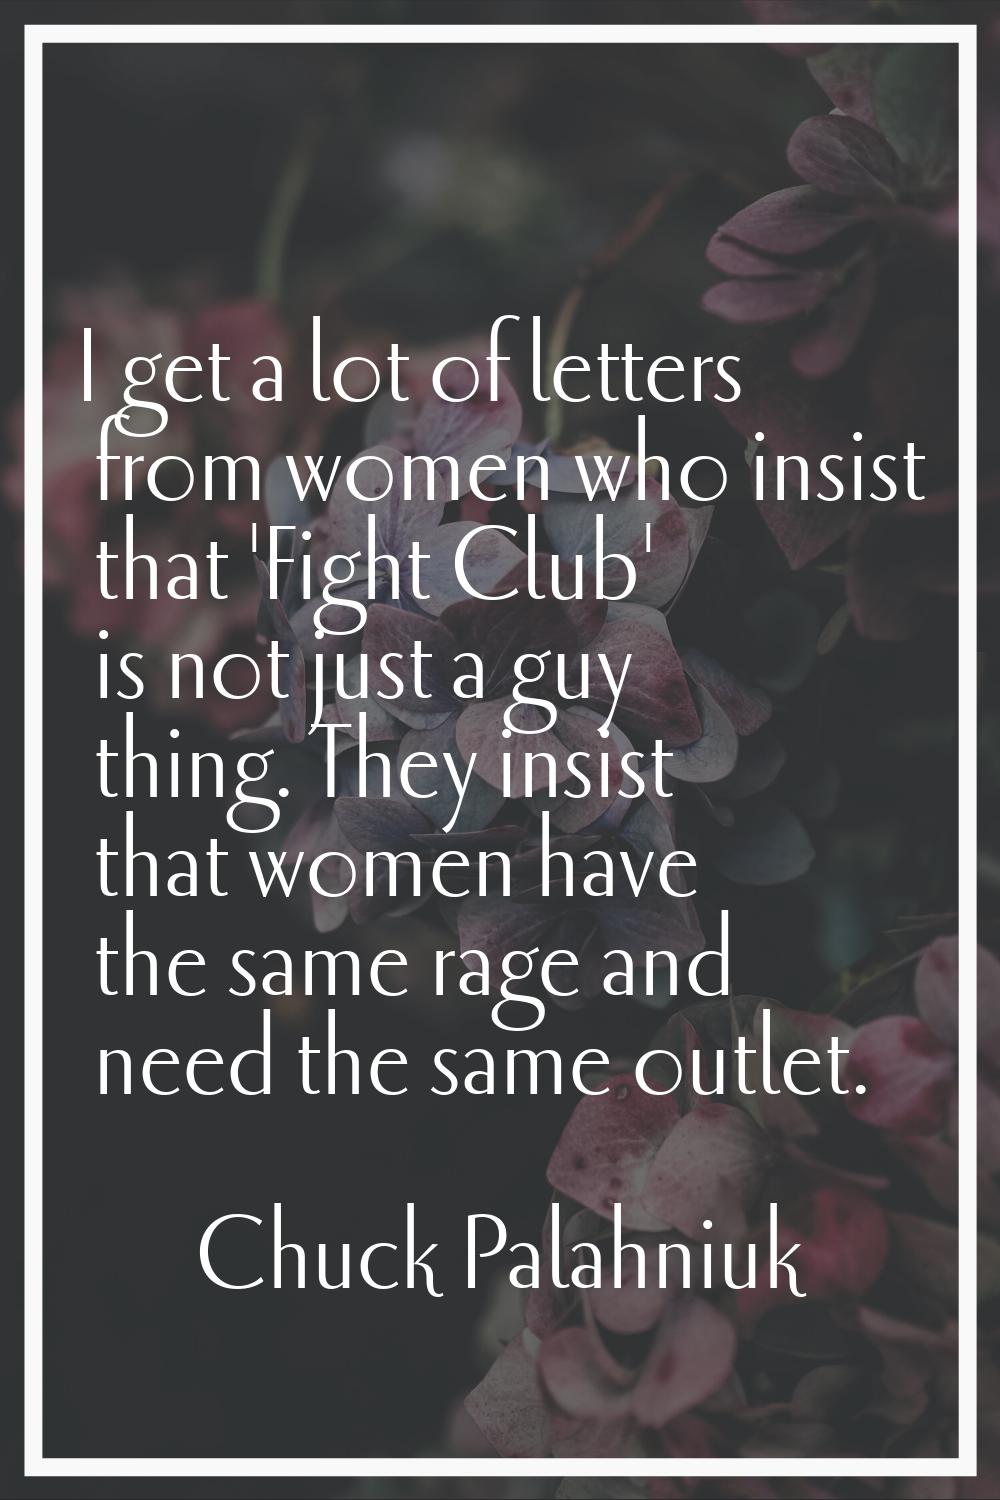 I get a lot of letters from women who insist that 'Fight Club' is not just a guy thing. They insist